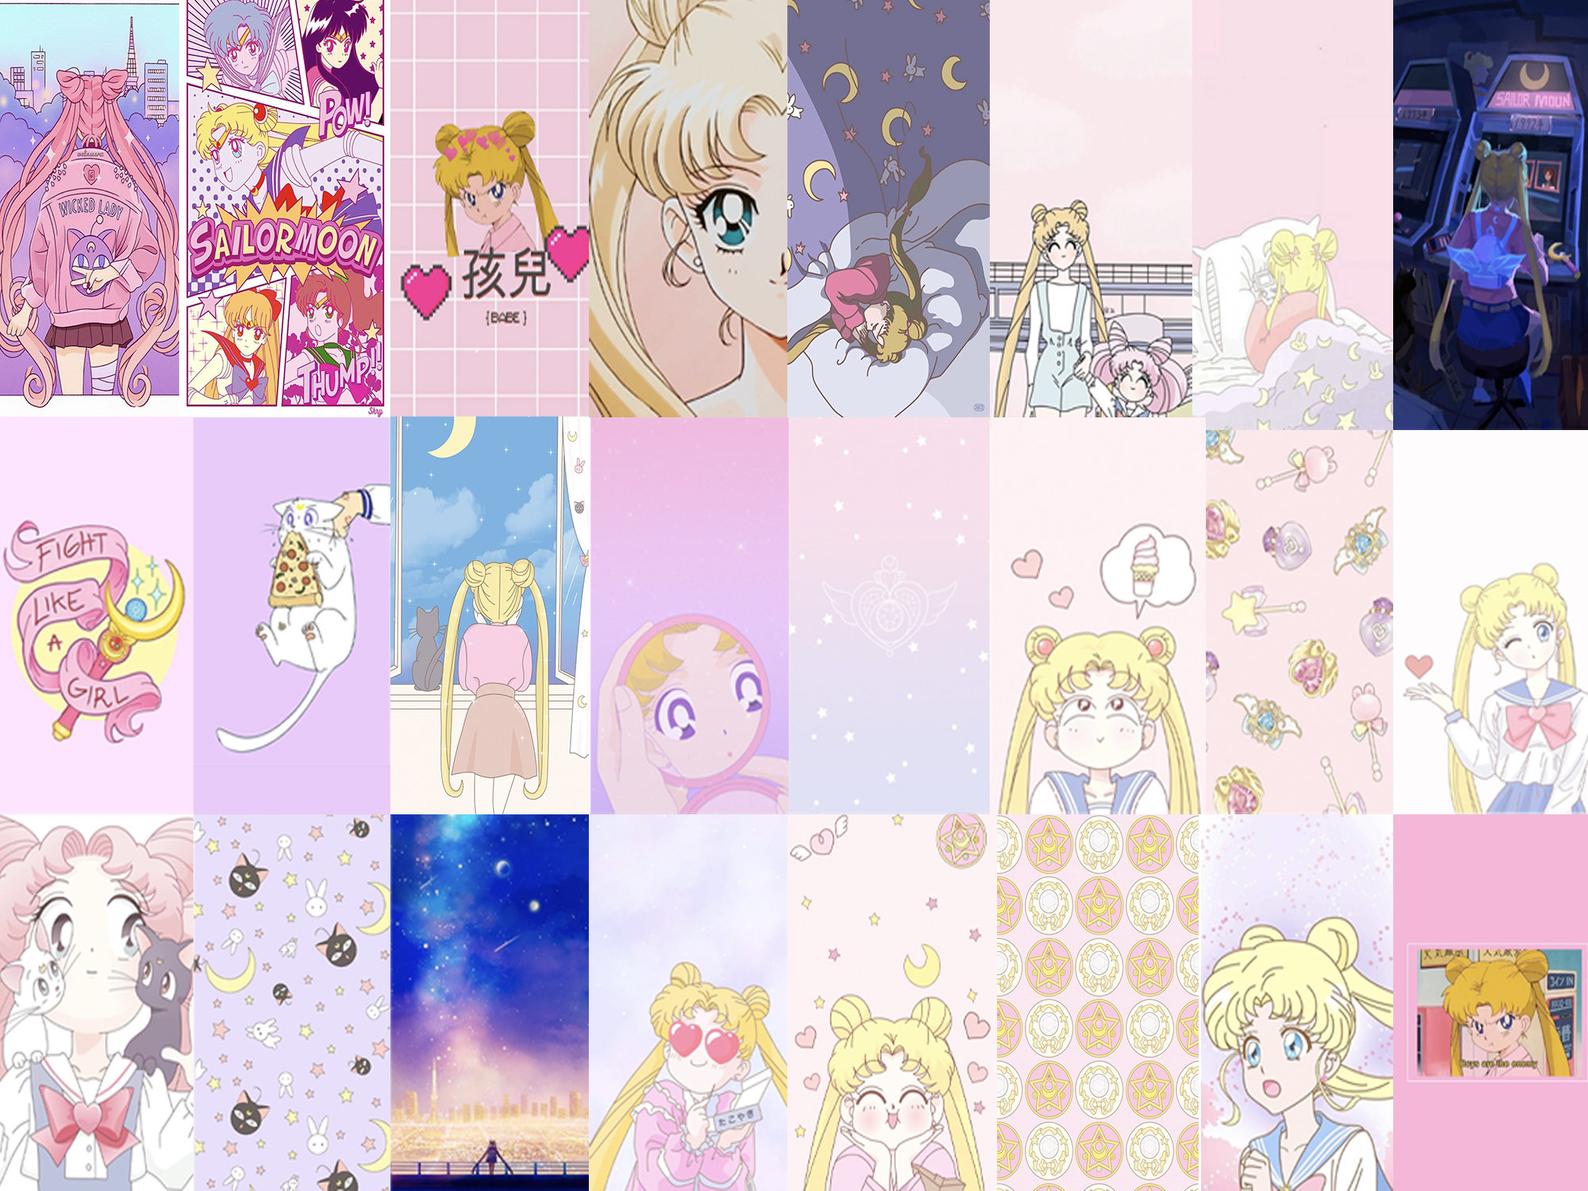 Anime Collages - Anime Collages added a new photo.